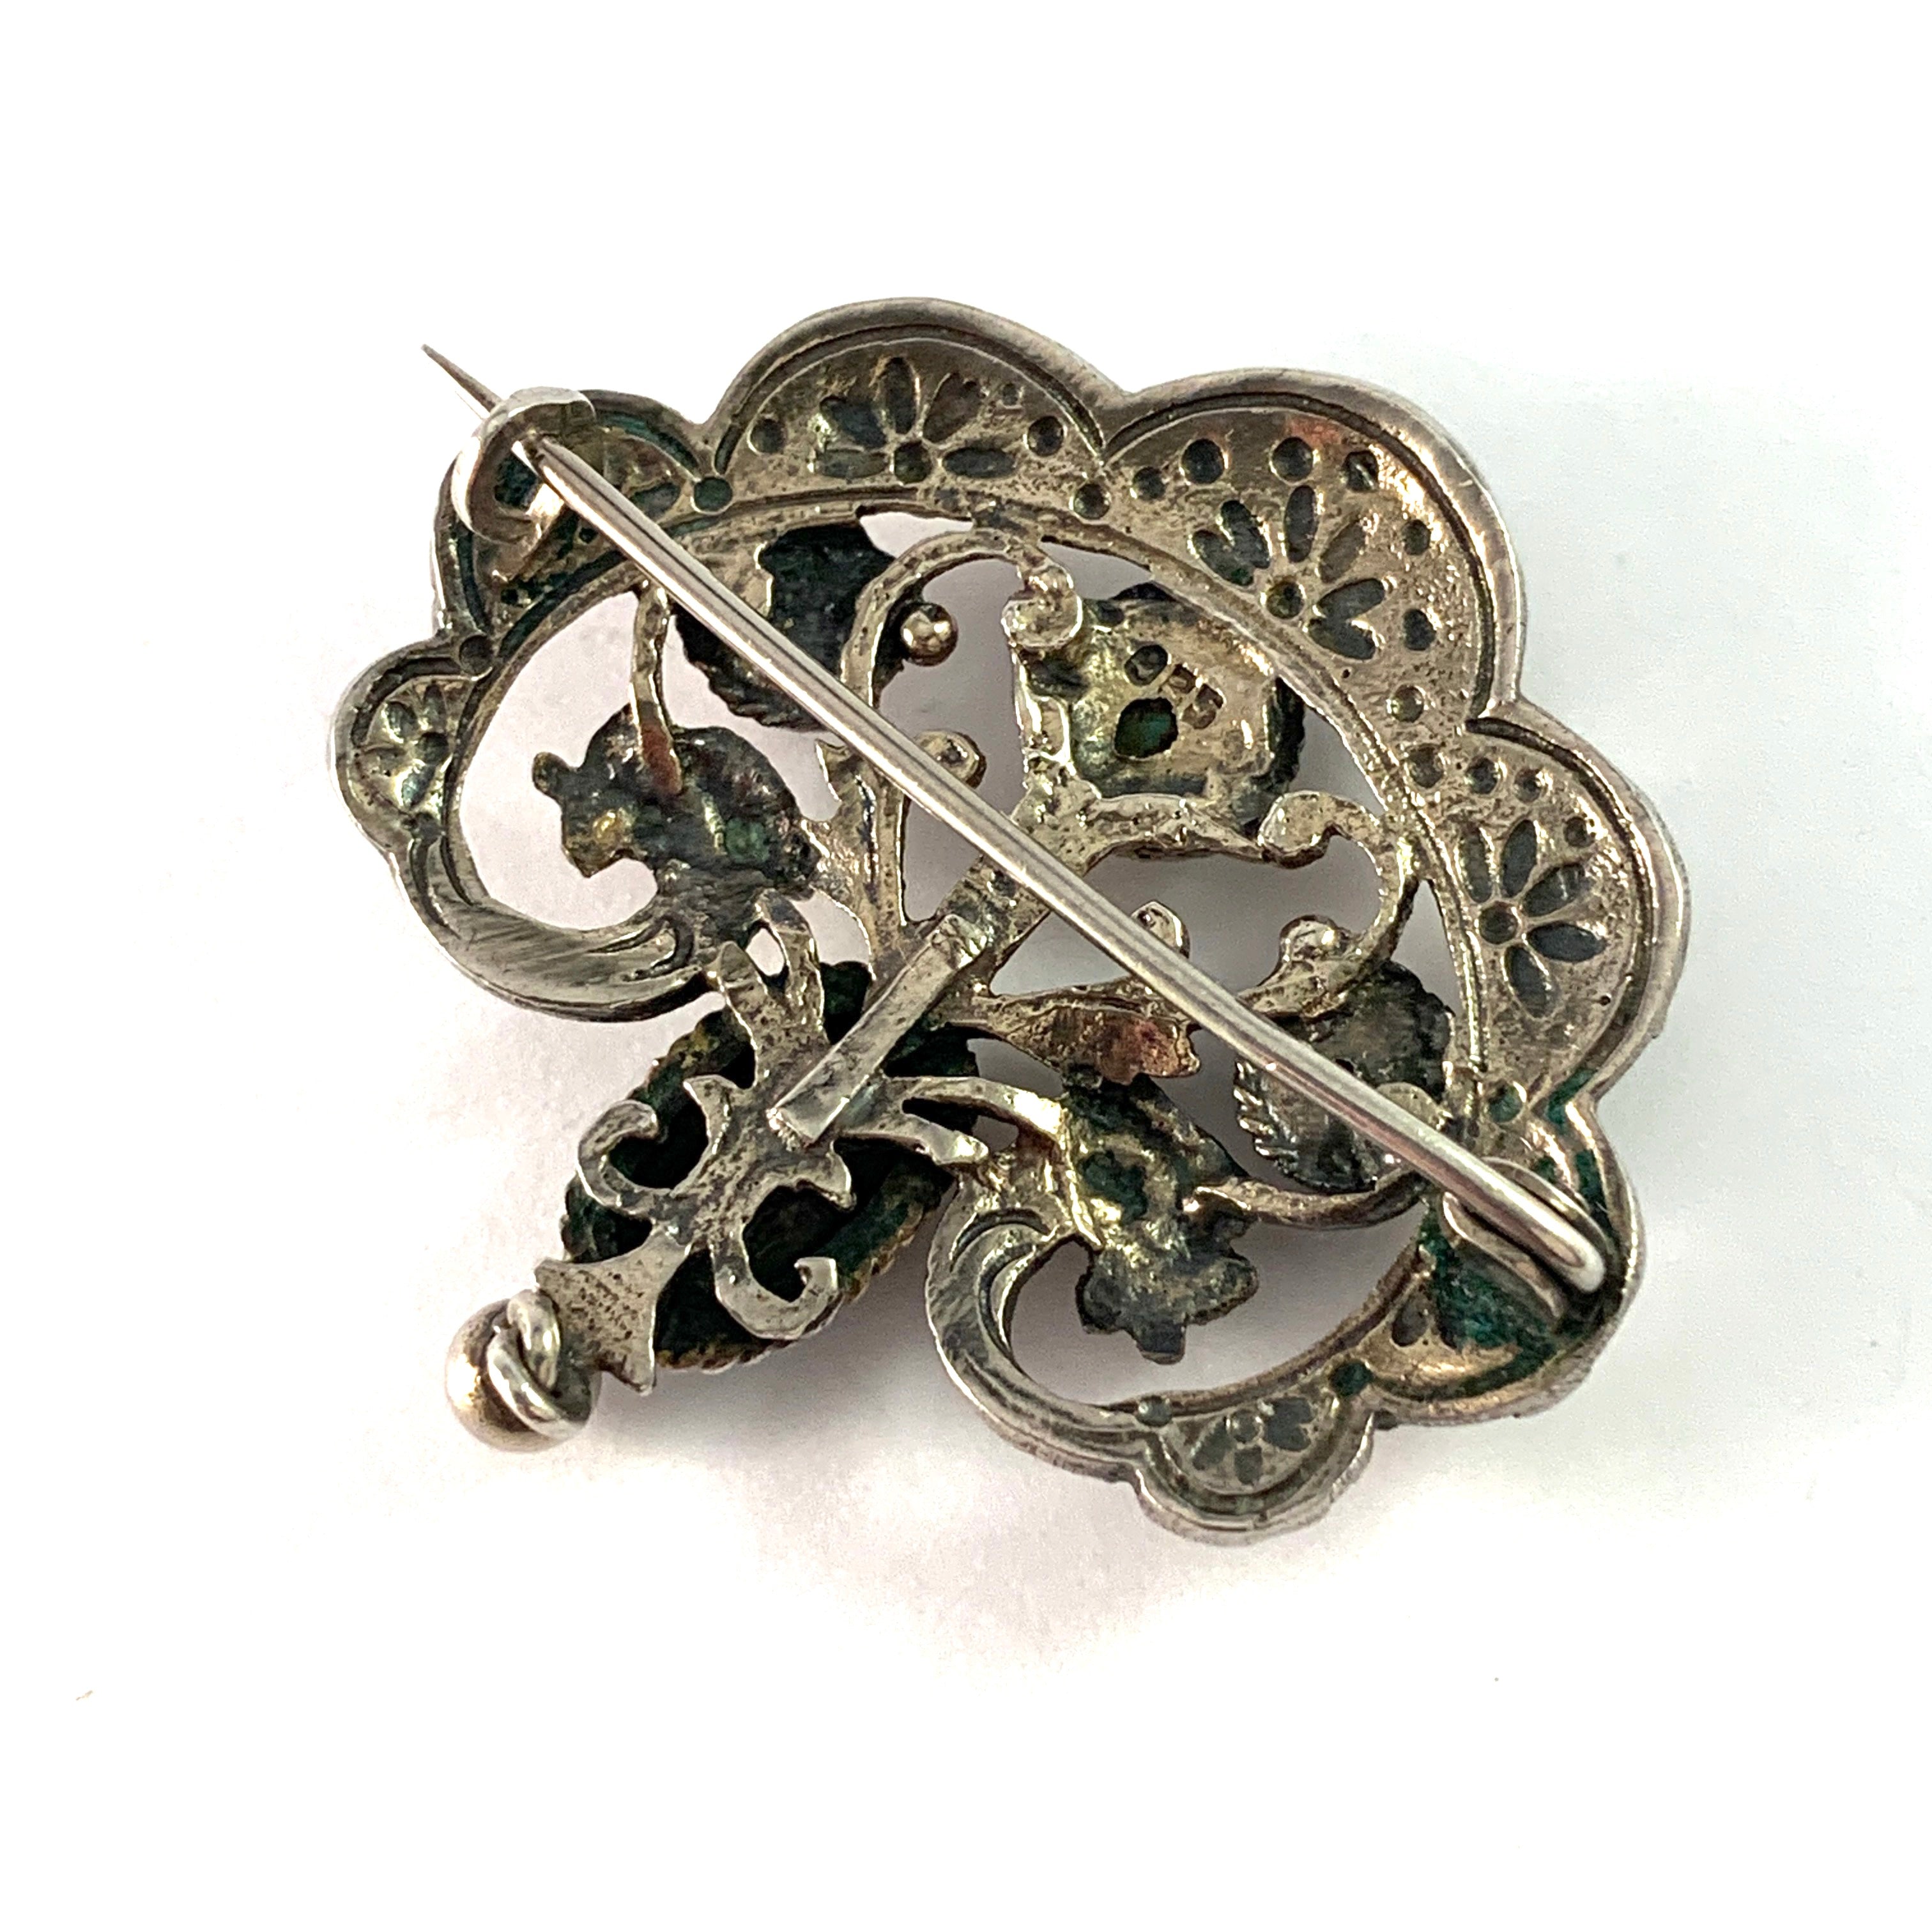 Austro Hungarian 1902-1918 Antique Renaissance Revival Sterling Silver Paste Stone Turquoise Brooch.